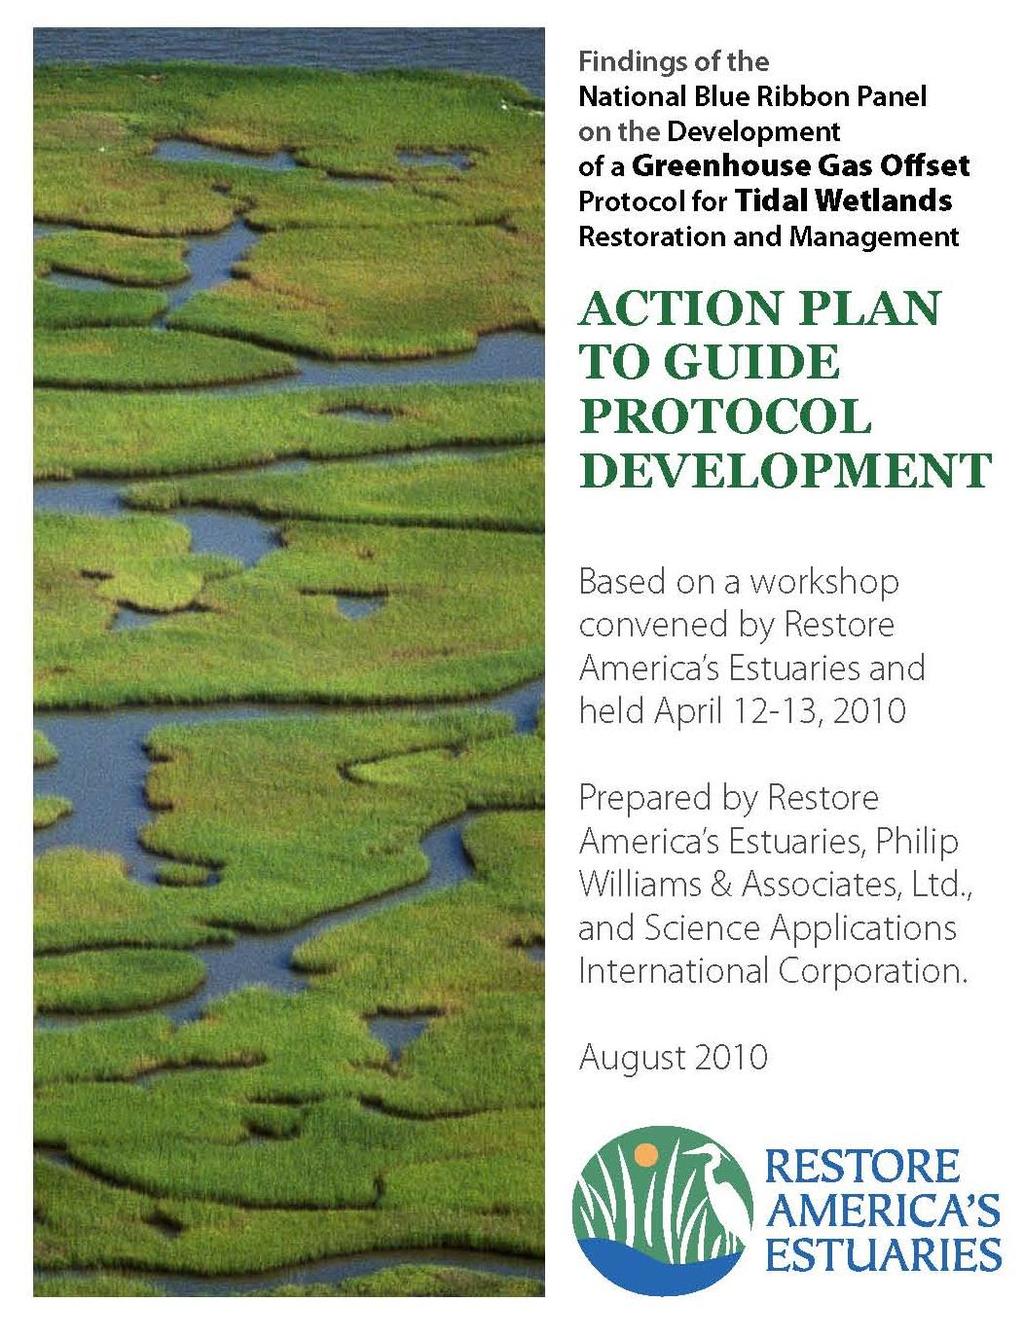 The restoration and avoided loss of tidal wetlands and